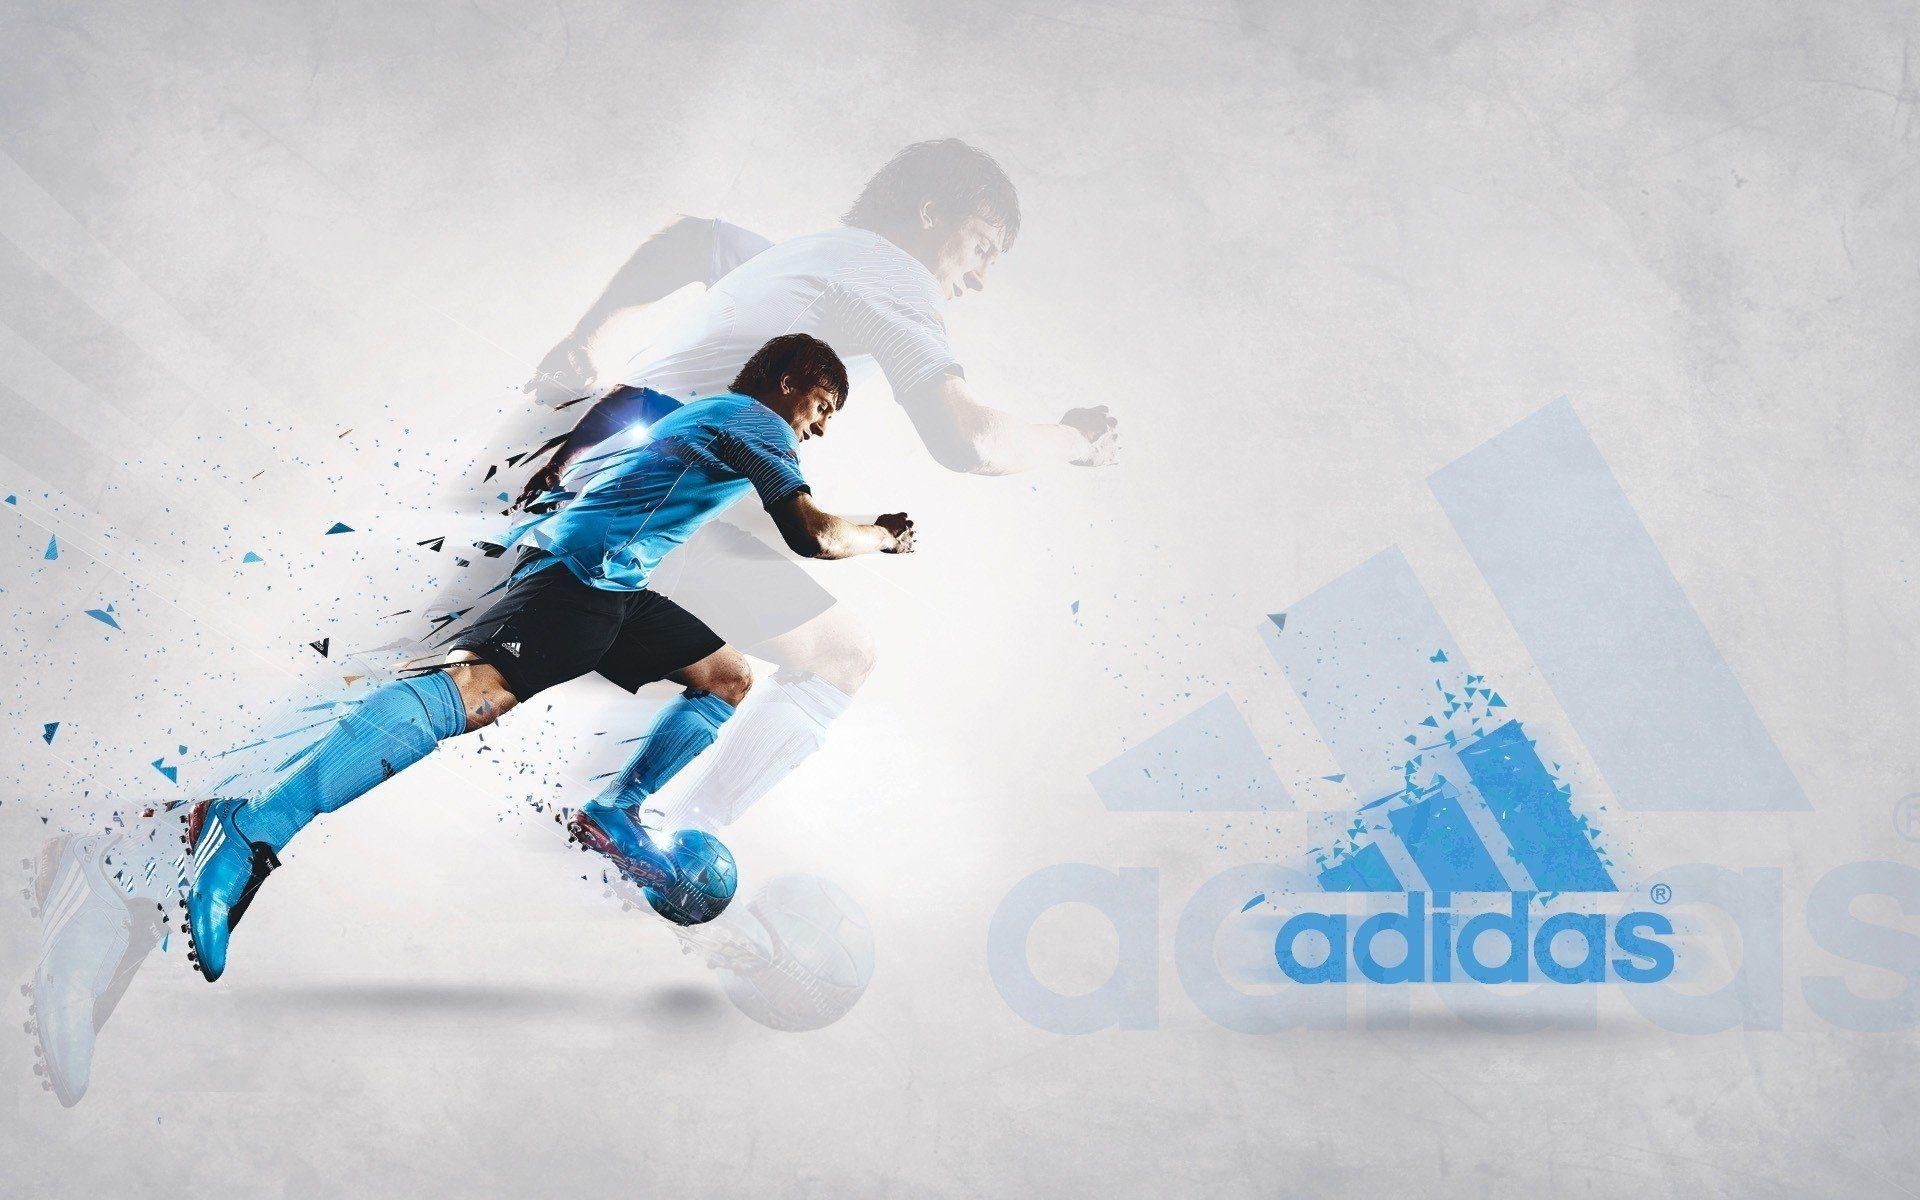 adidas Full HD Wallpaper and Background Imagex1200